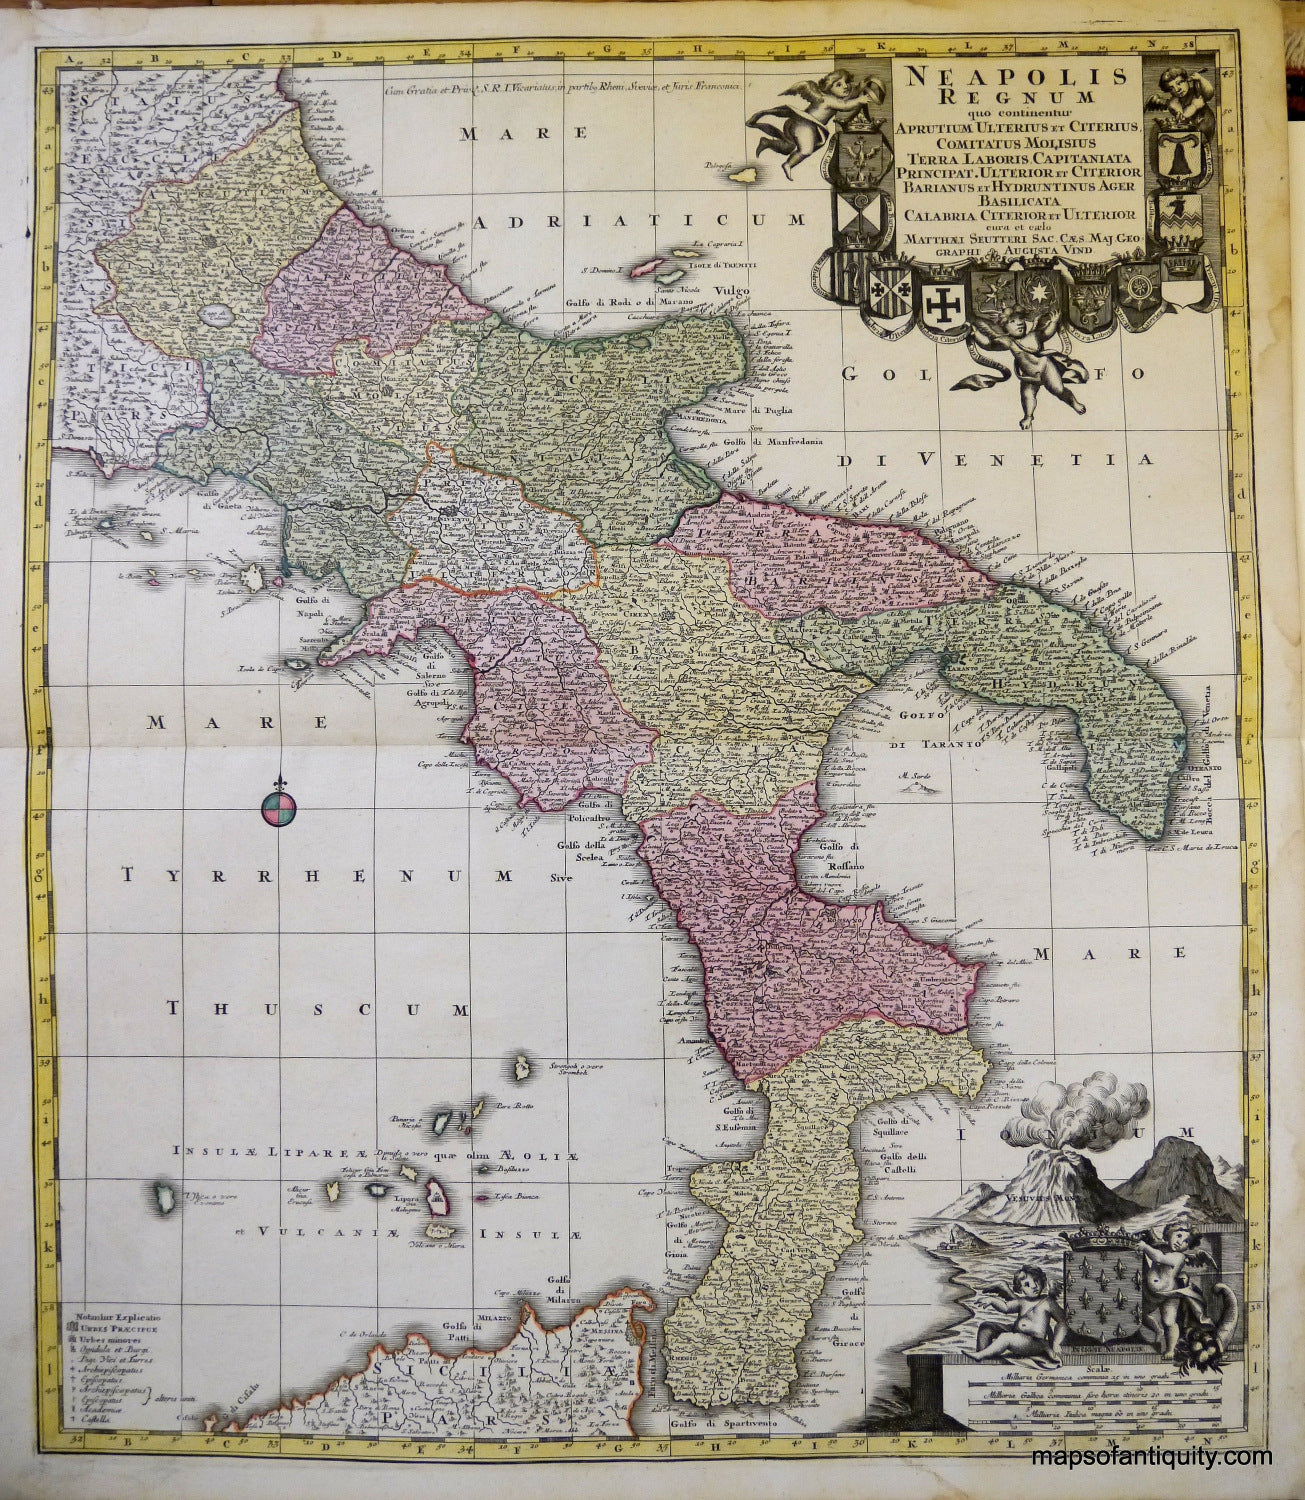 Antique-Hand-Colored-Map--Neapolis-Regnum-(Kingdom-of-Naples)-**********-Europe-Italy-c.-1730-Seutter-Maps-Of-Antiquity